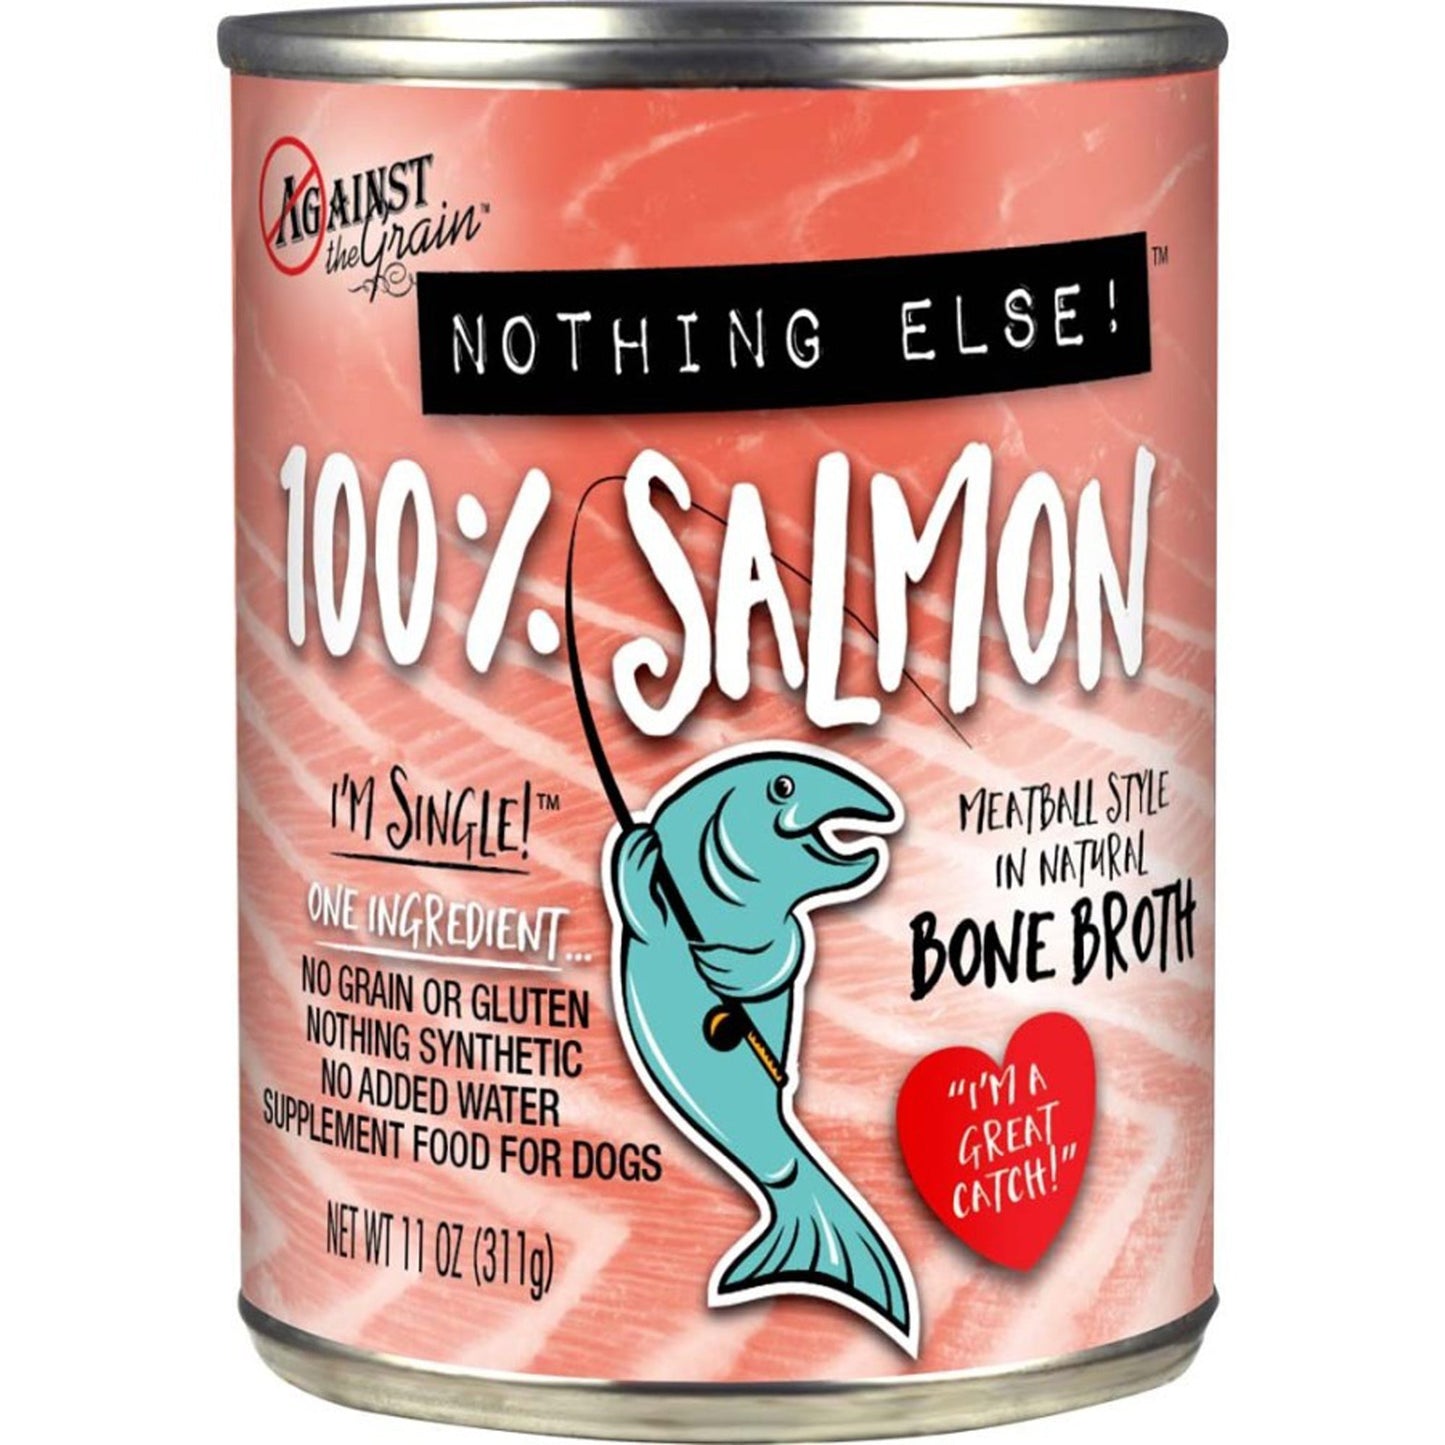 Against the Grain Nothing Else 100% One Ingredient Adult Wet Dog Food Salmon, 11oz. (Case of 12)